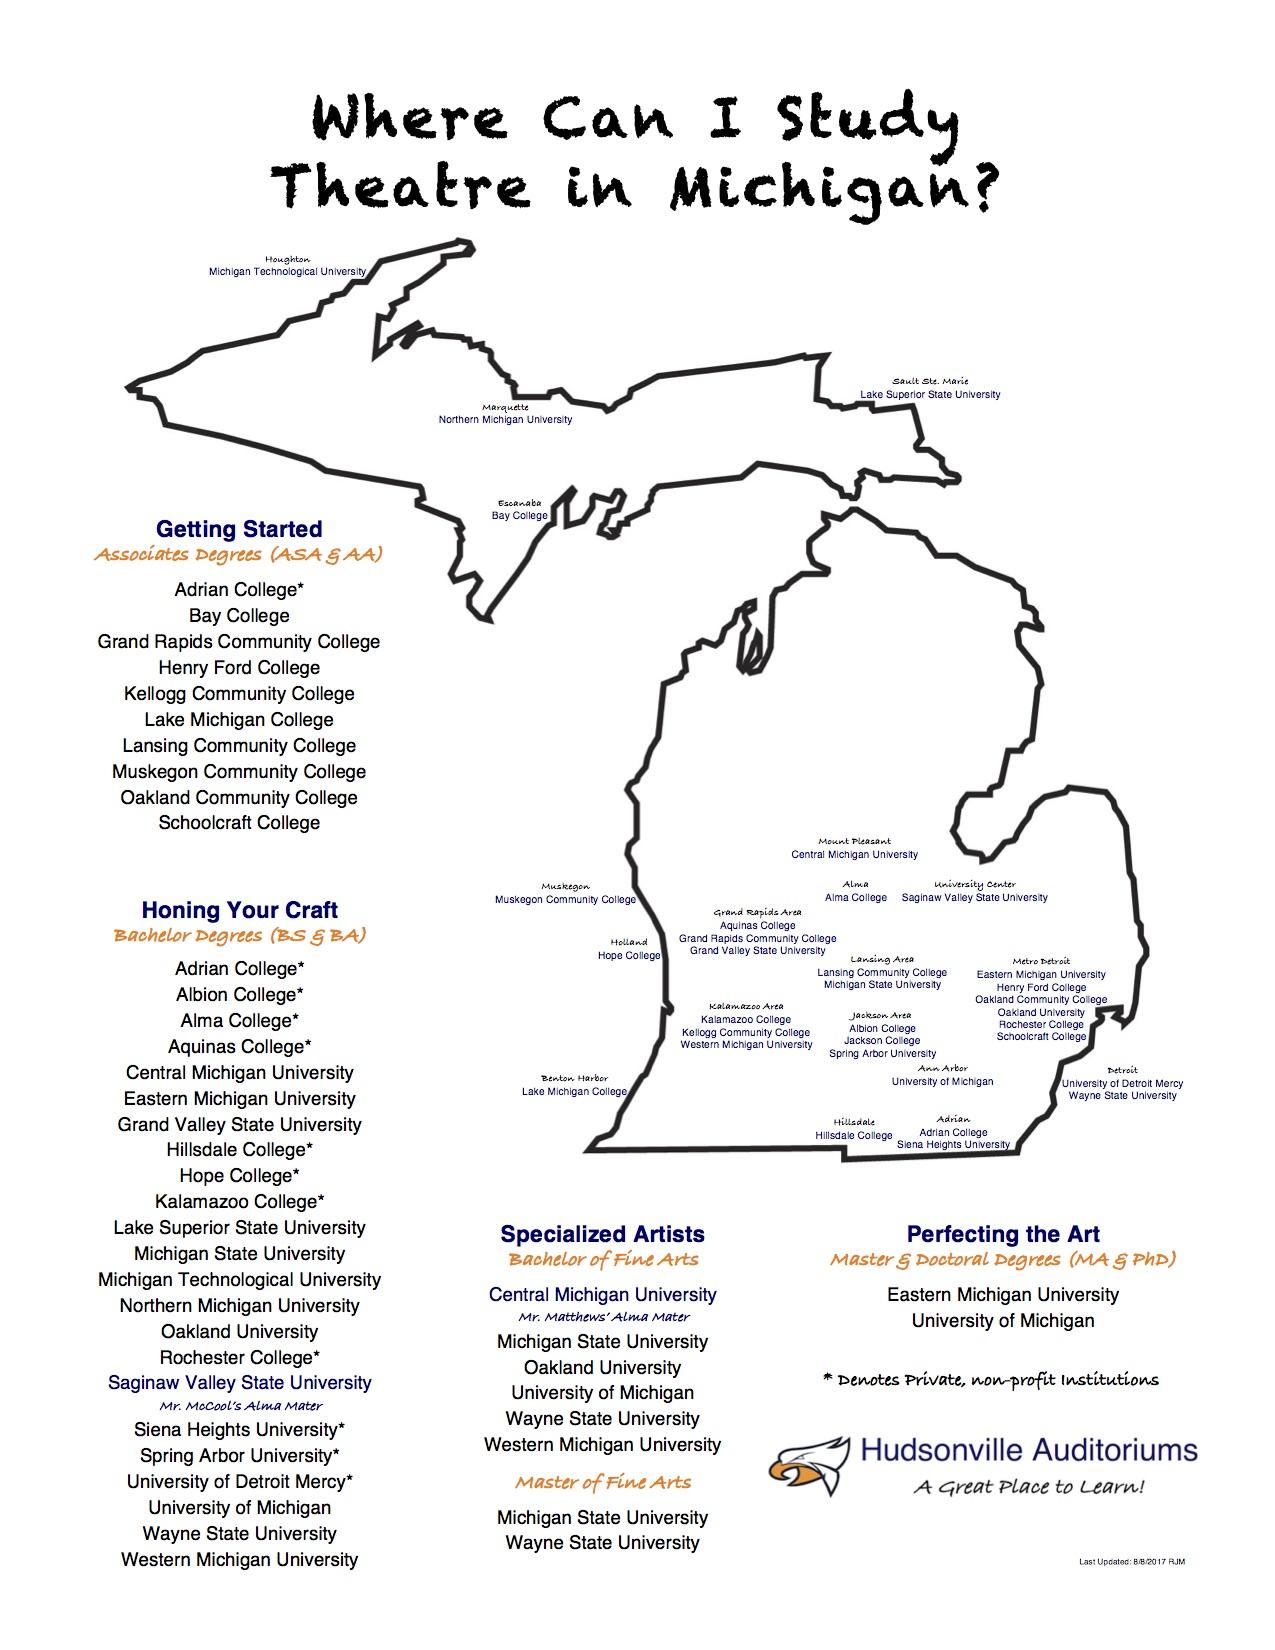 Infographic showing the name and location of every public and private higher educational institution in the State of Michigan offering a theatre degree